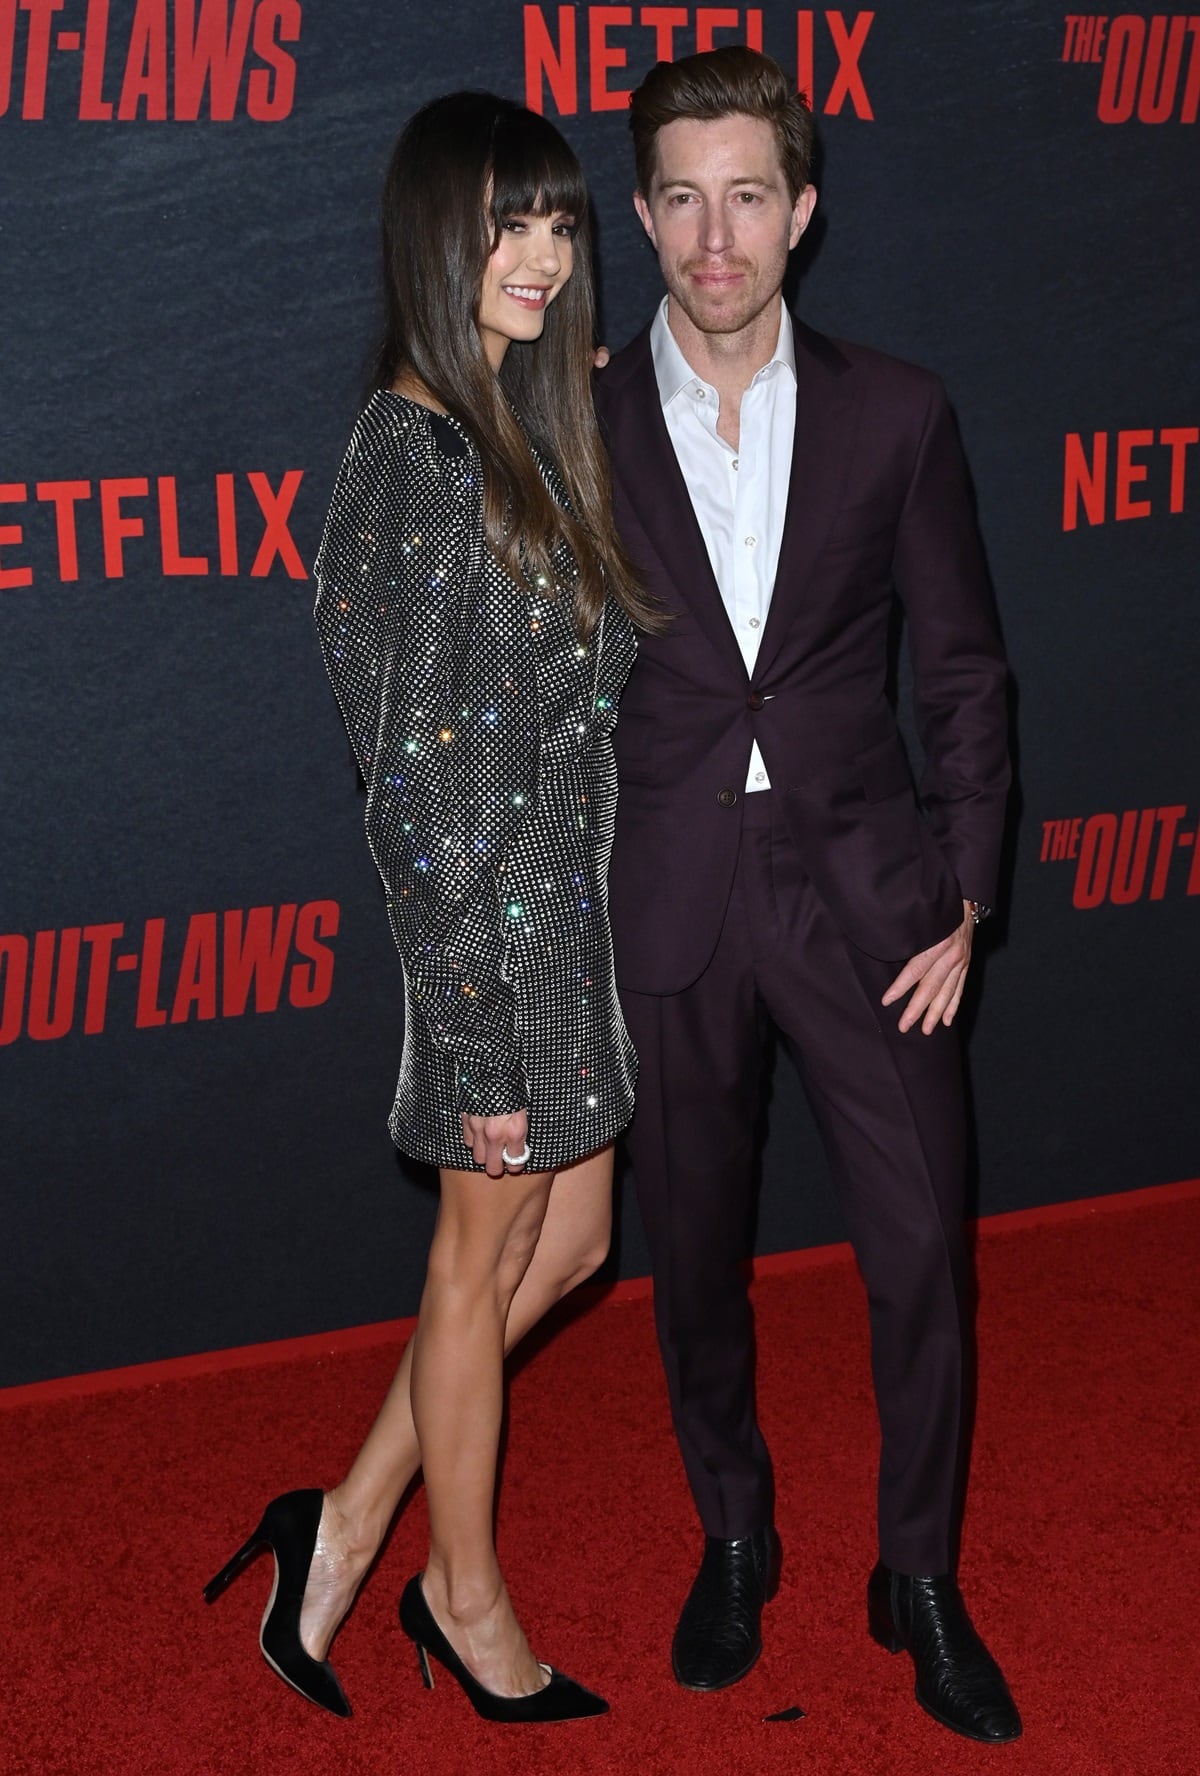 Shaun White is taller than Nina Dobrev, with a height of 5 feet 8 inches (173 cm), while Nina Dobrev stands at 5 feet 5 ¼ inches (165.7 cm)